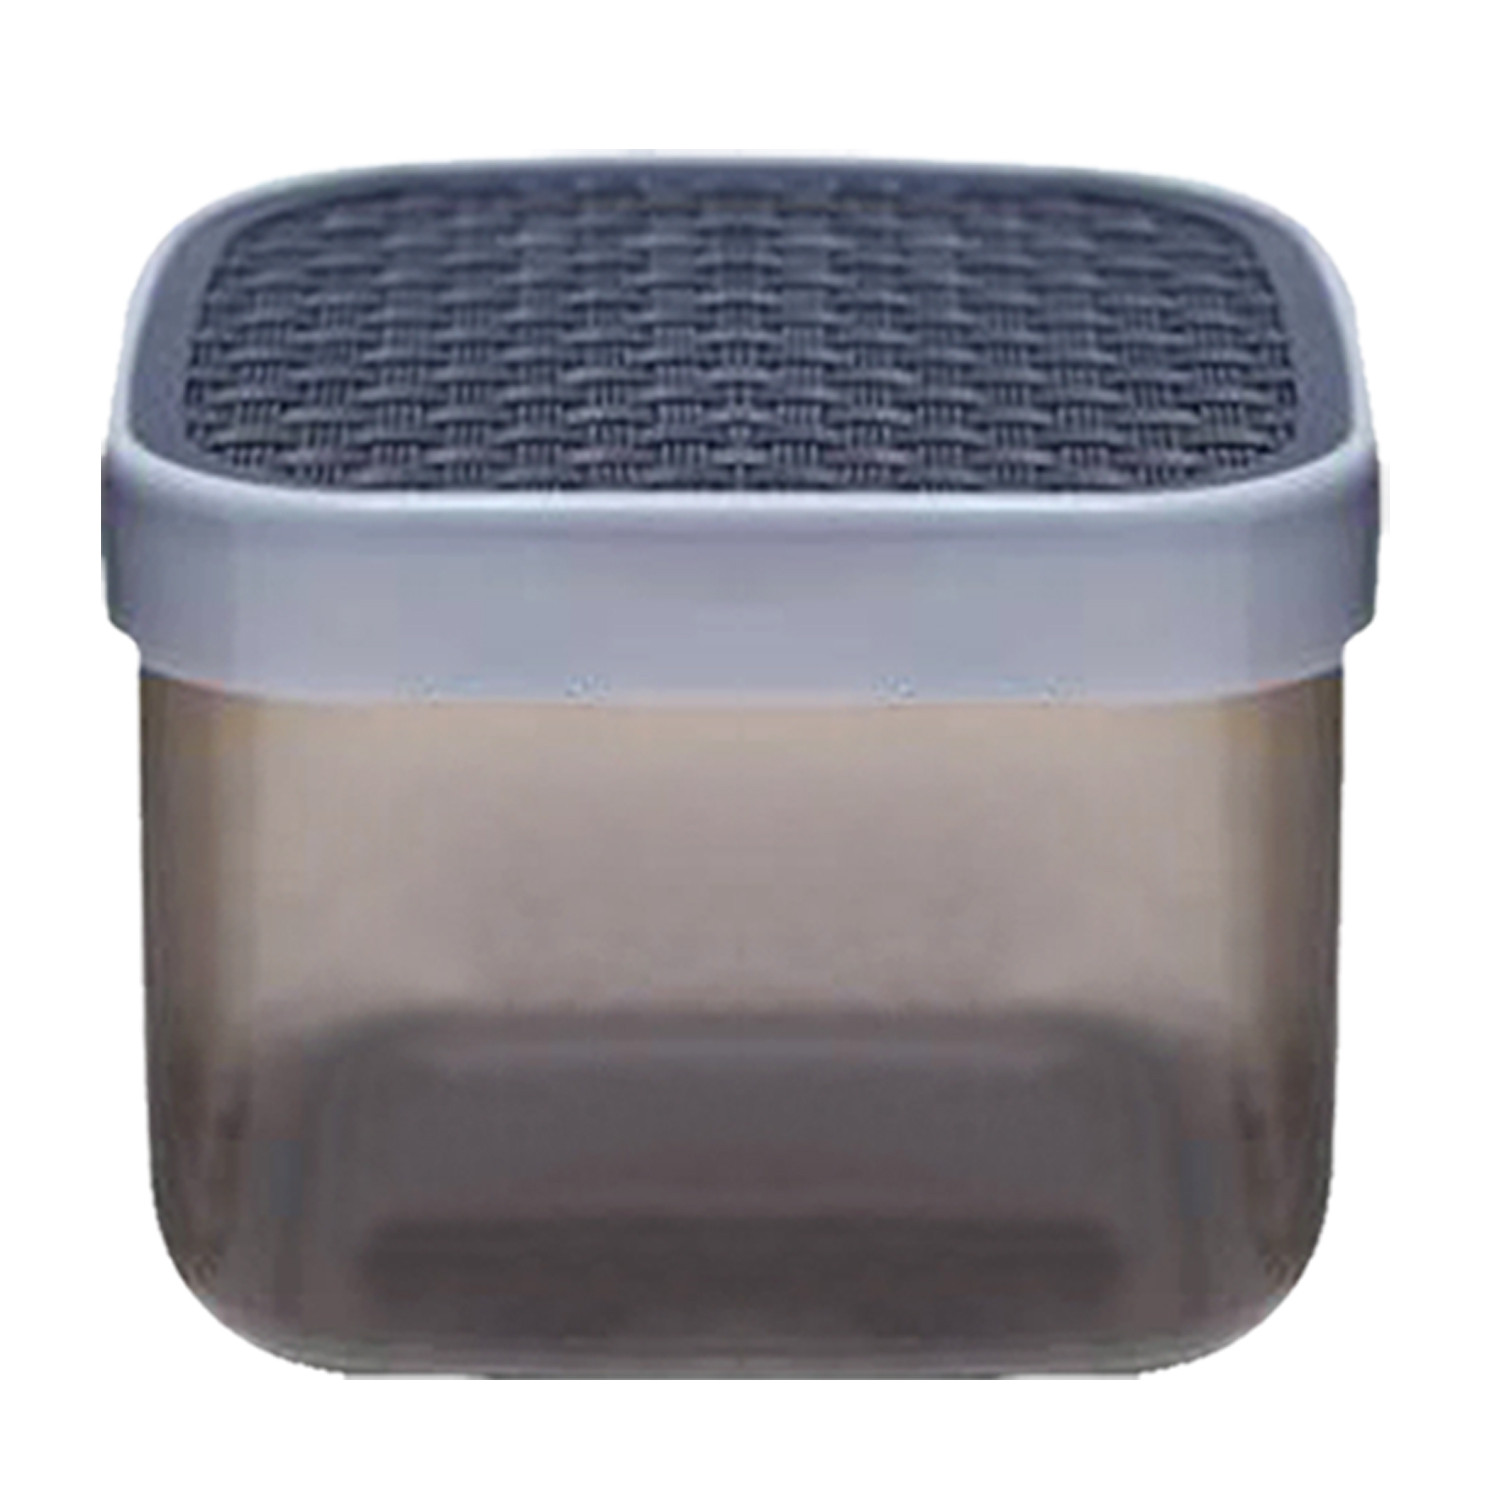 Kuber Industries Check Deisgn Lid  Multi Purpose Plastic Container,1200ml, Set of 12 (Grey & Blue)